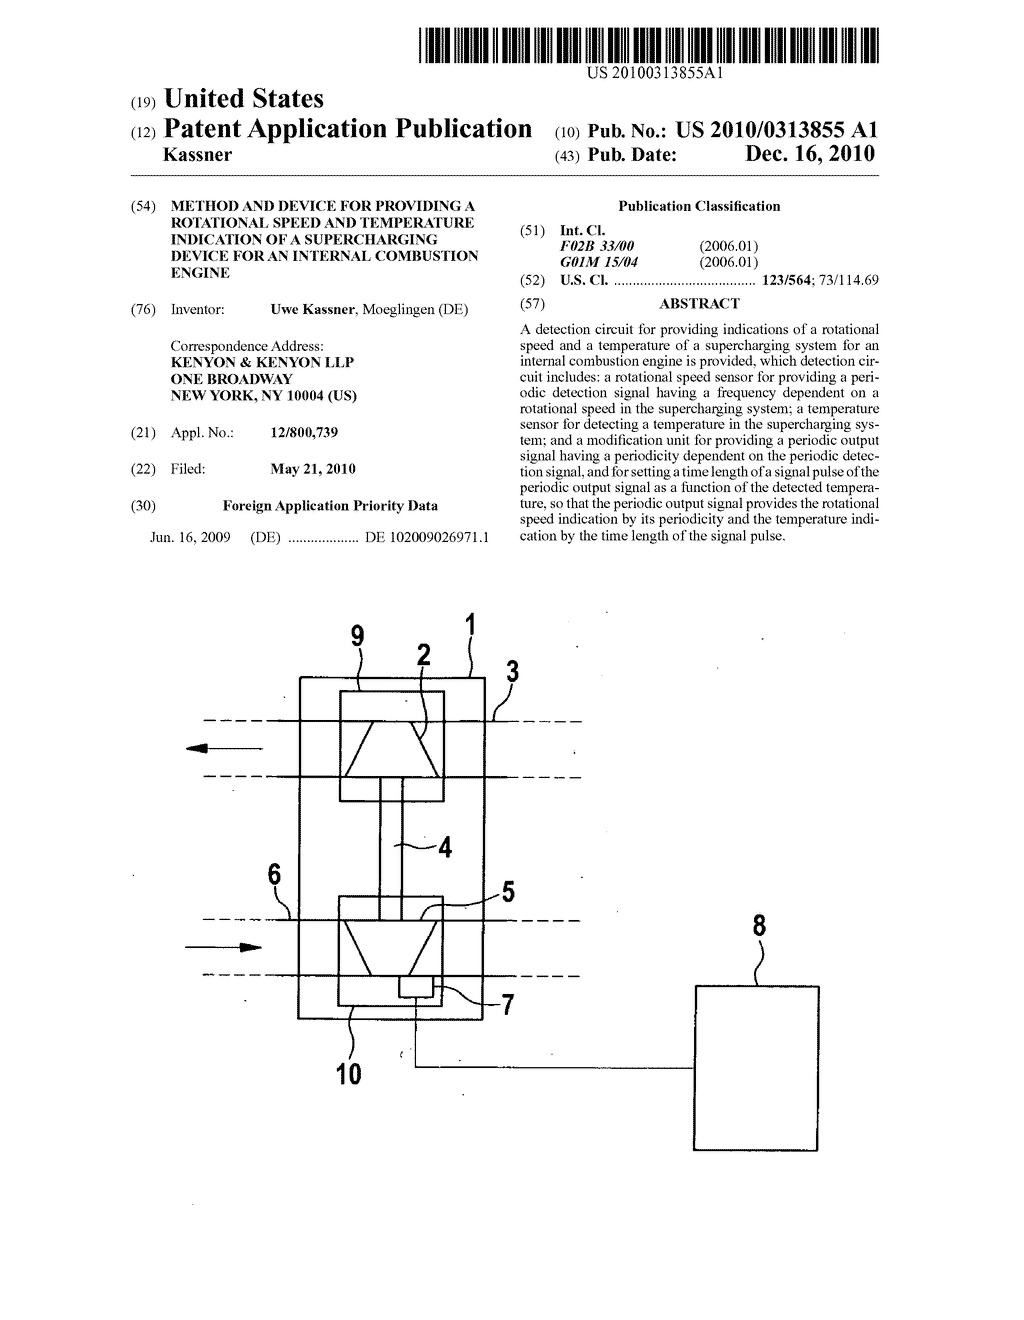 Method and device for providing a rotational speed and temperature indication of a supercharging device for an internal combustion engine - diagram, schematic, and image 01